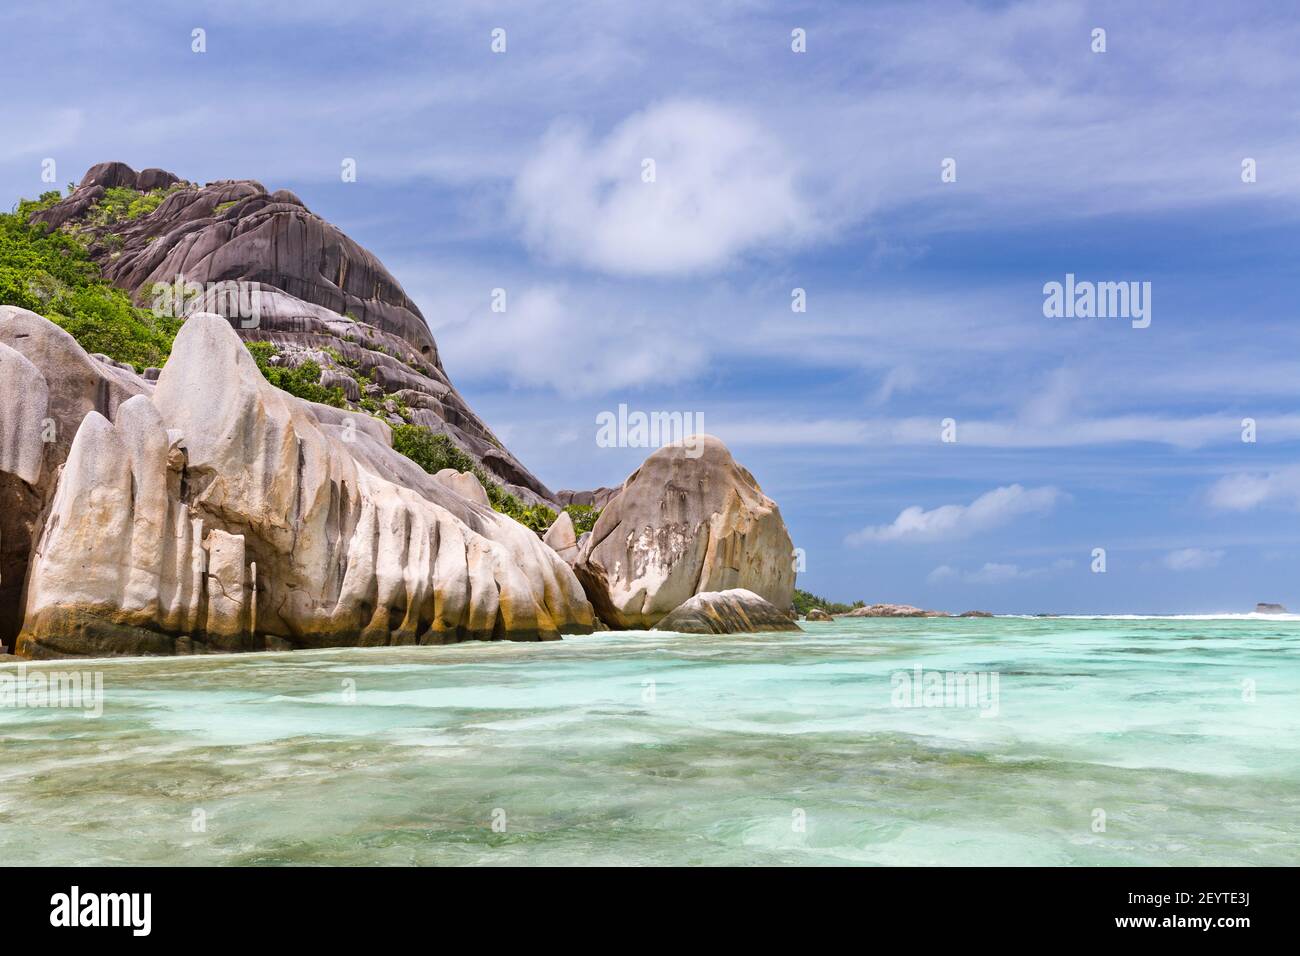 Turquoise water and coral reefs in front of the La Digue granite coastline, Seychelles Stock Photo